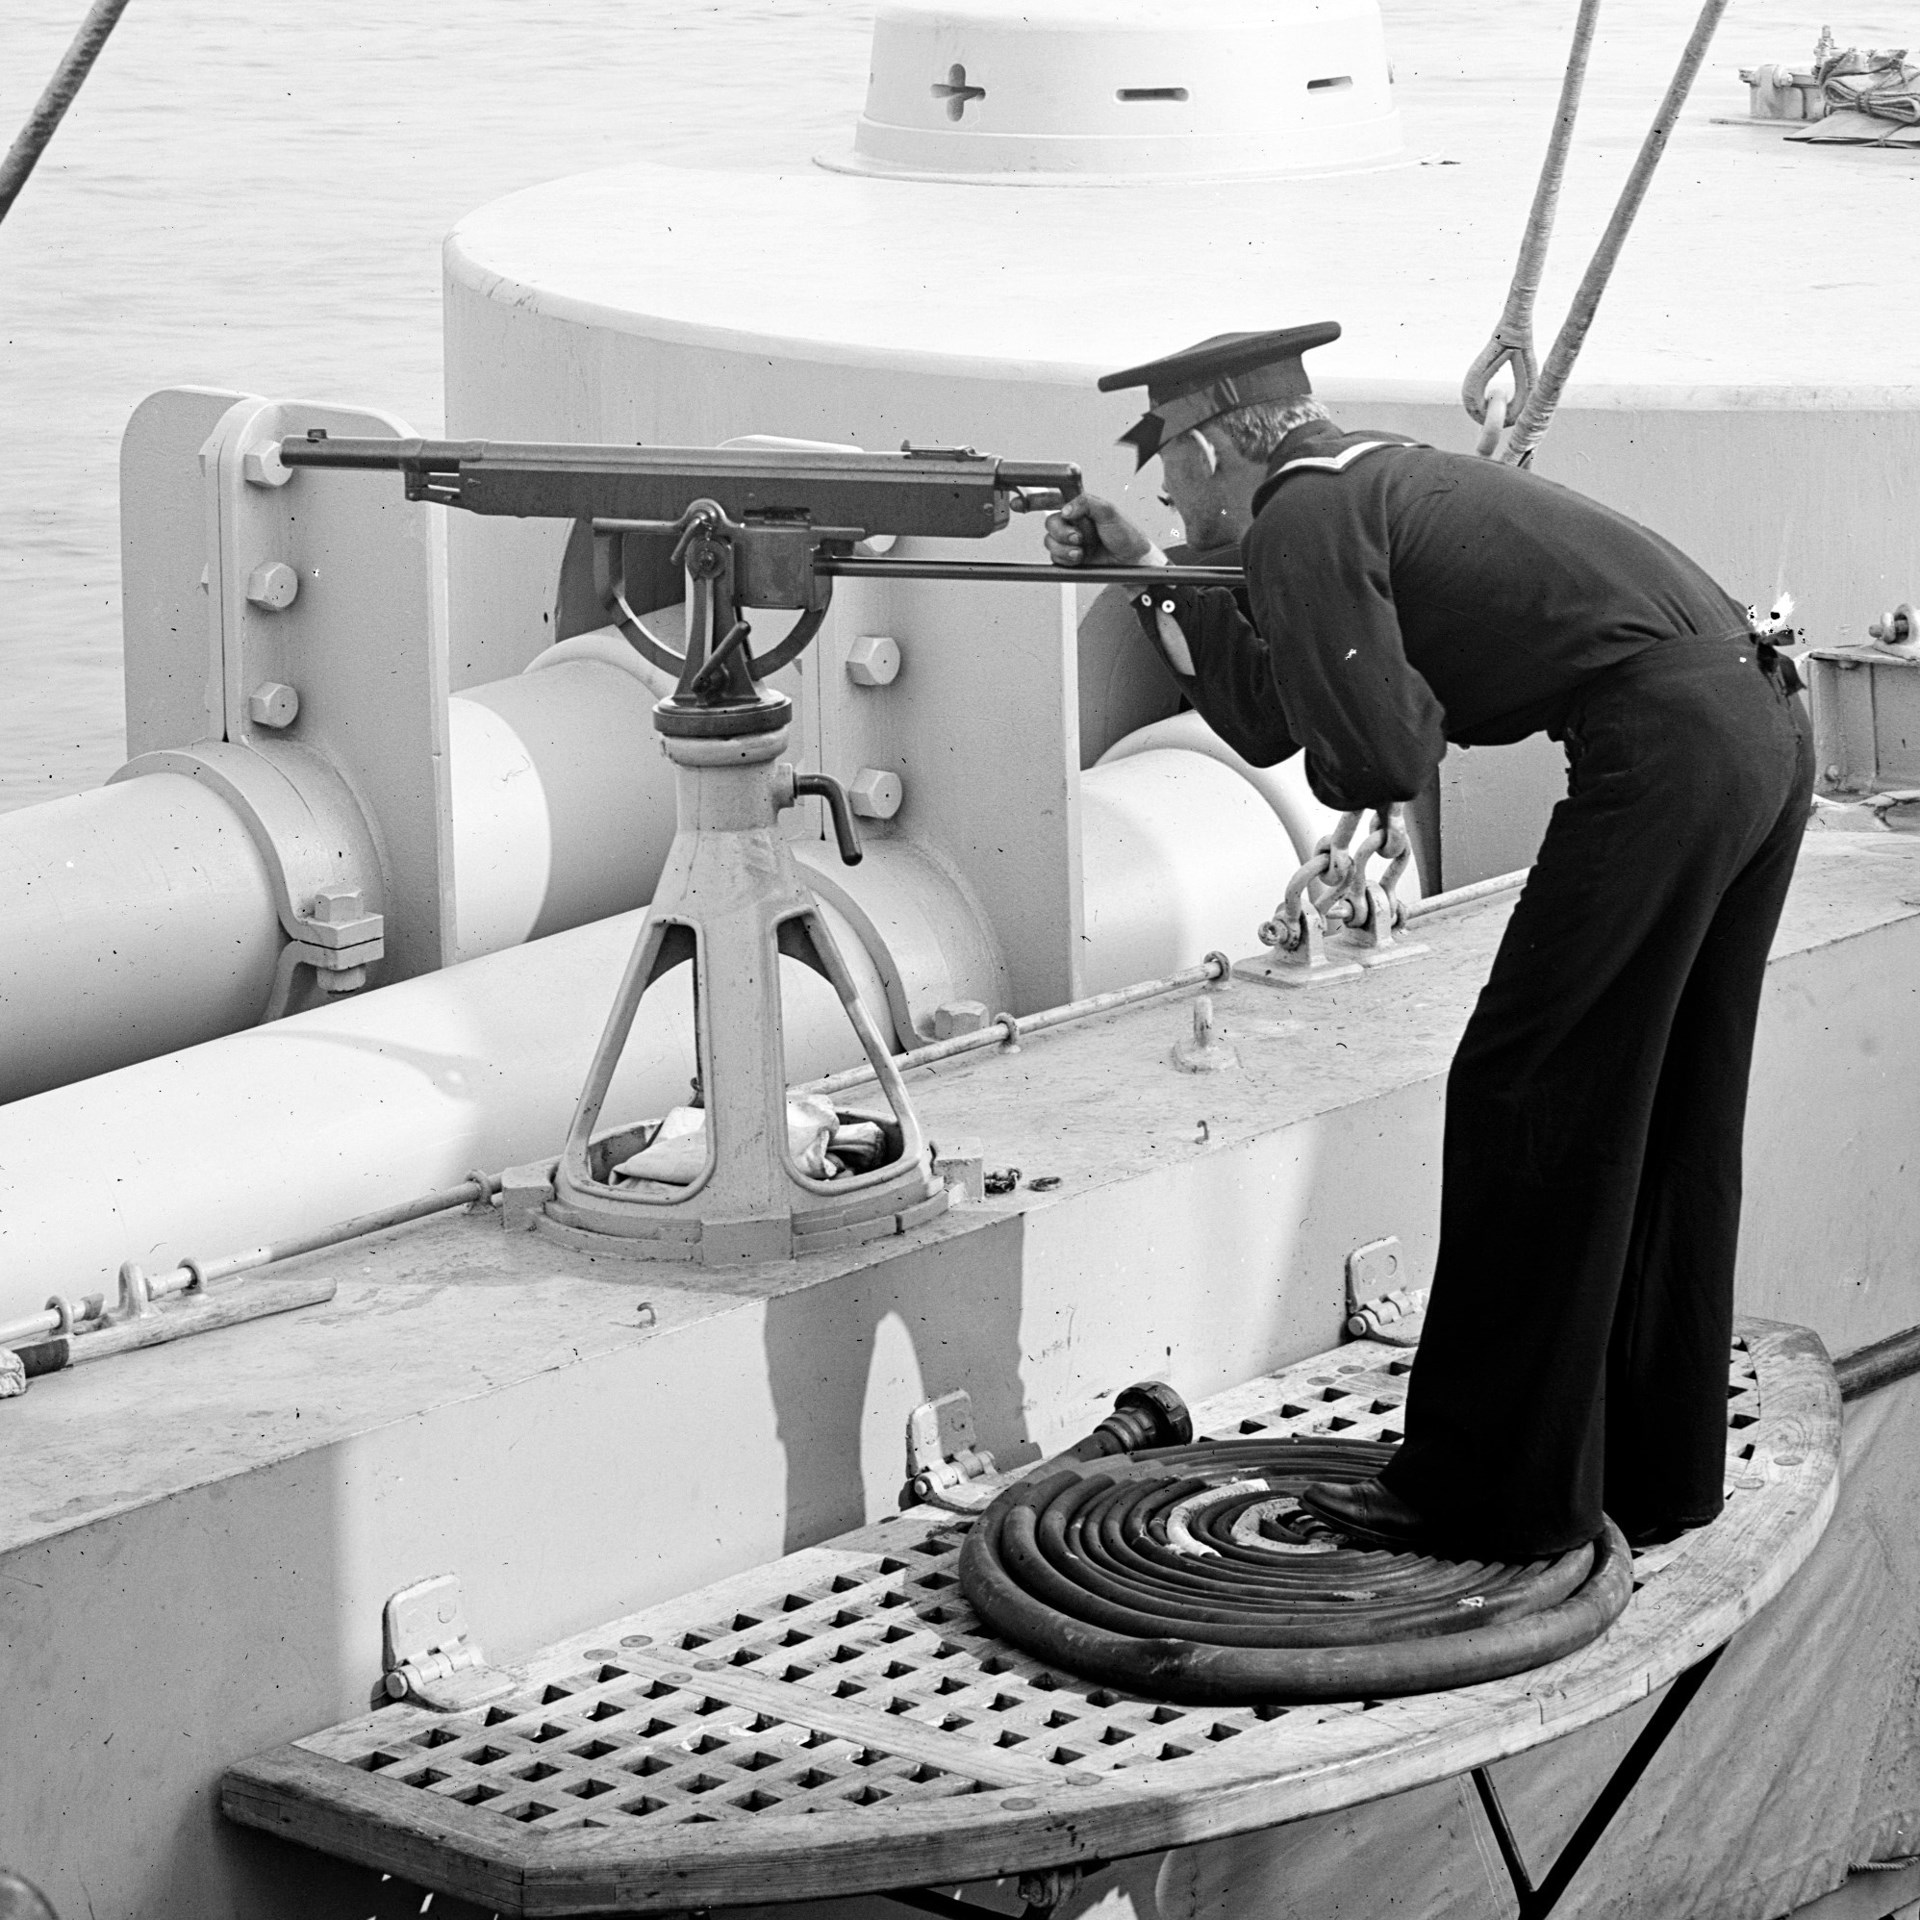 1)	an M1895 pedestal-mounted aboard the pre-dreadnought battleship U.S.S. Iowa (BB-4), launched in March 1896. Four M1895 machine guns were listed as part of the ship’s armament. Library of Congress